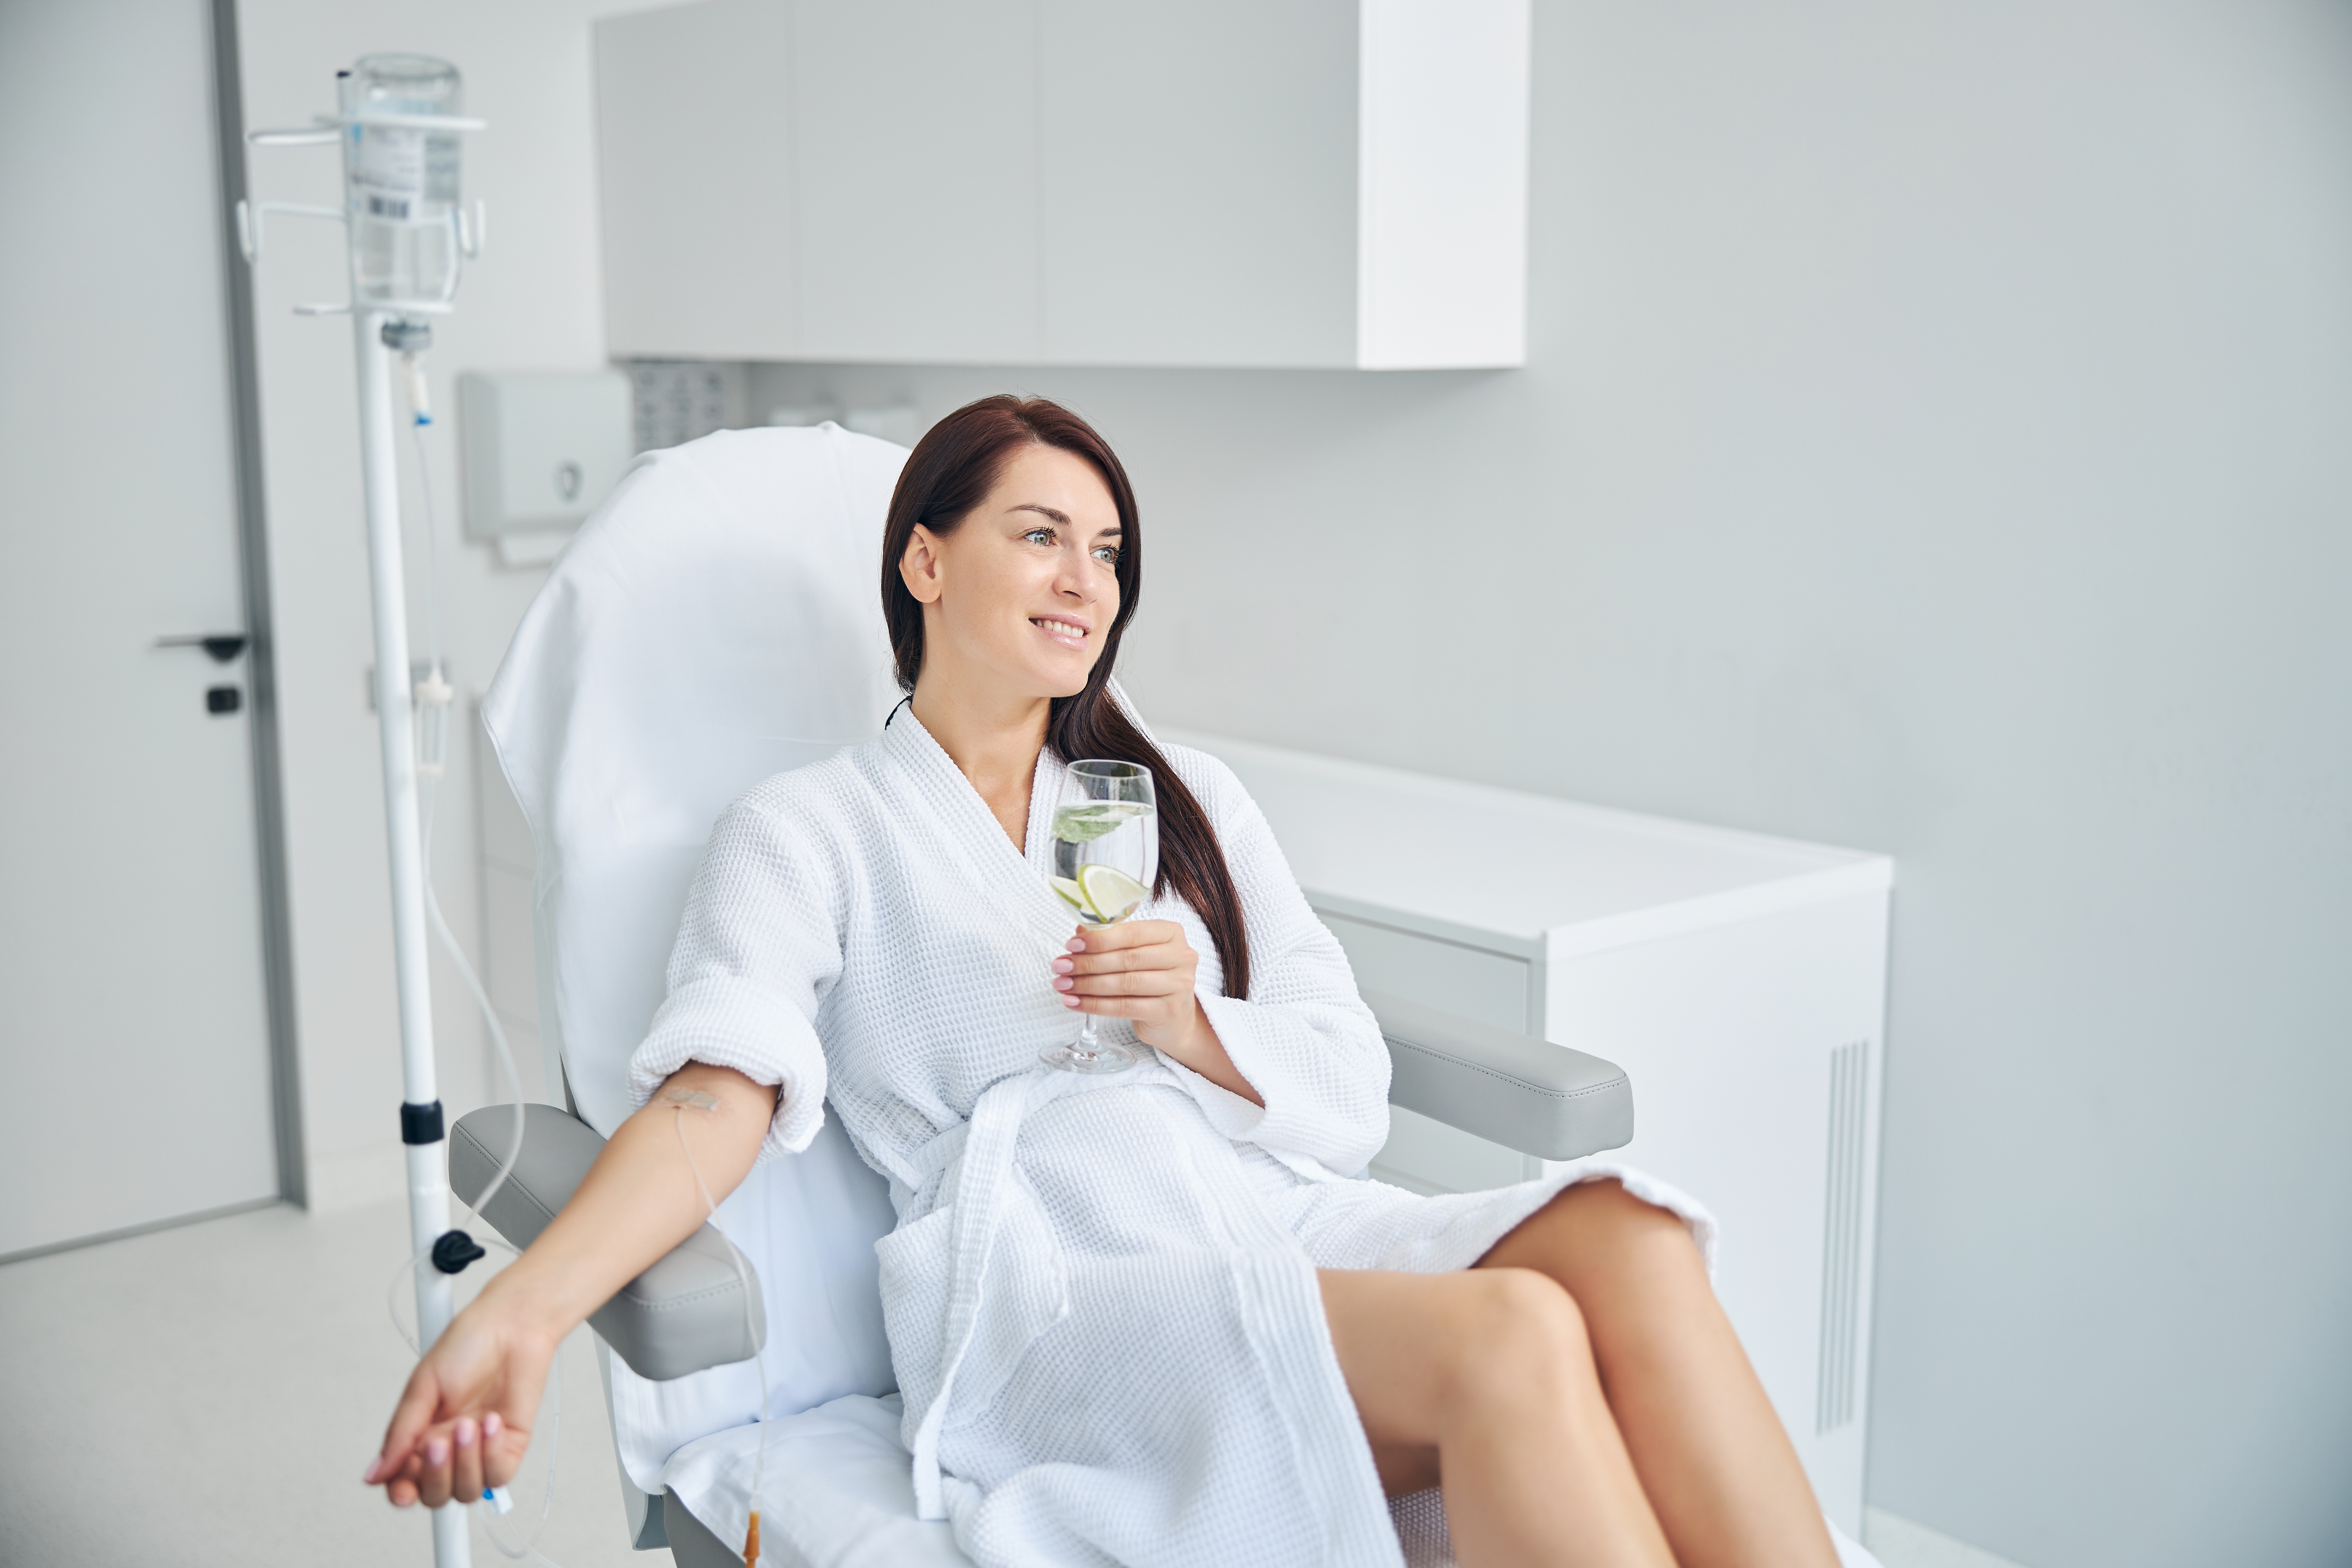 Beautiful lady with loose long dark hair gazing into the distance during a medical procedure